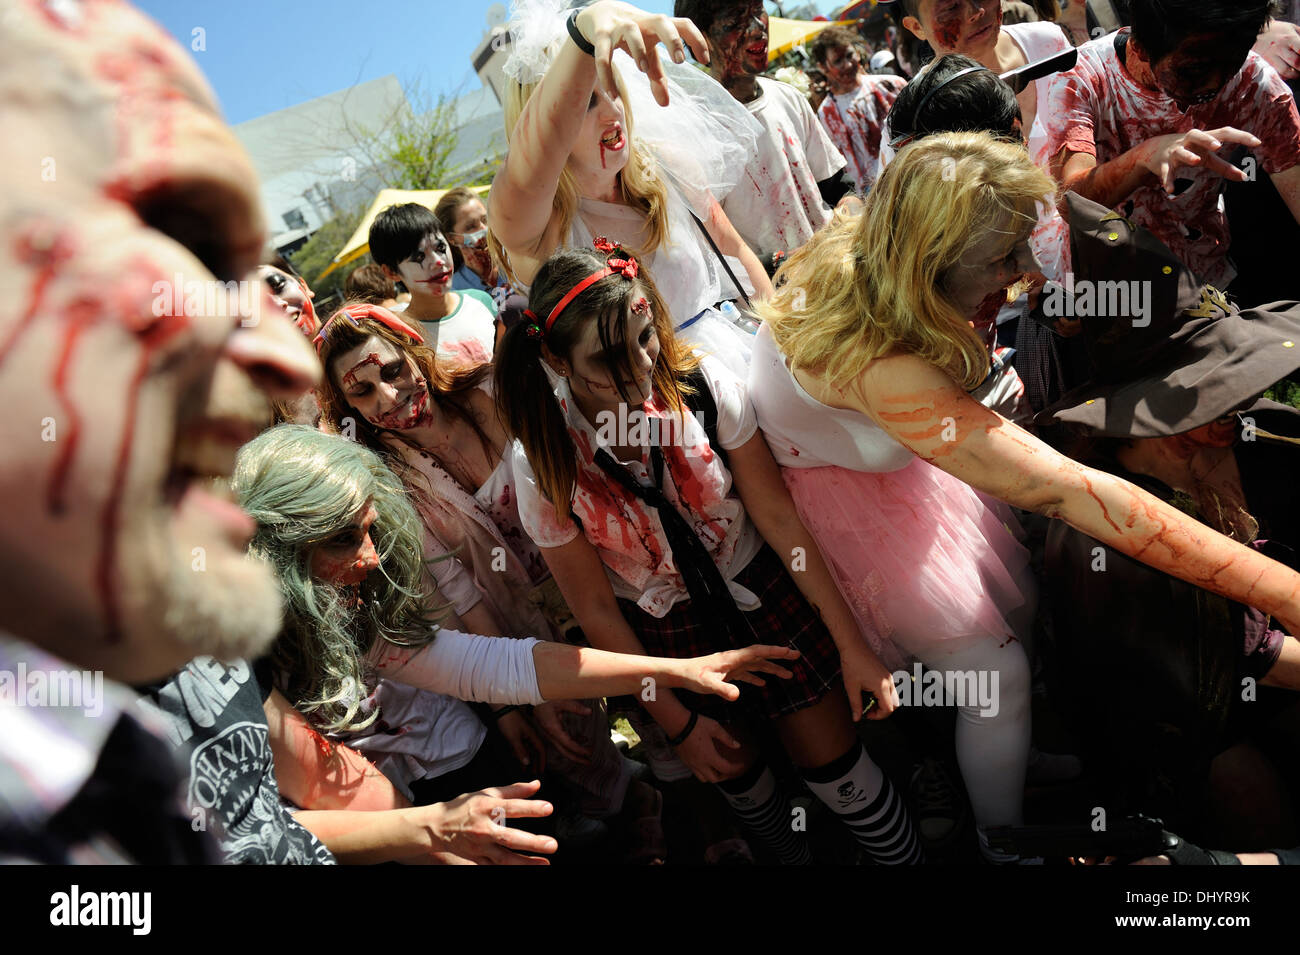 Crowd of Zombies in the inaugural Zombie Walk, Perth, Western Australia Stock Photo